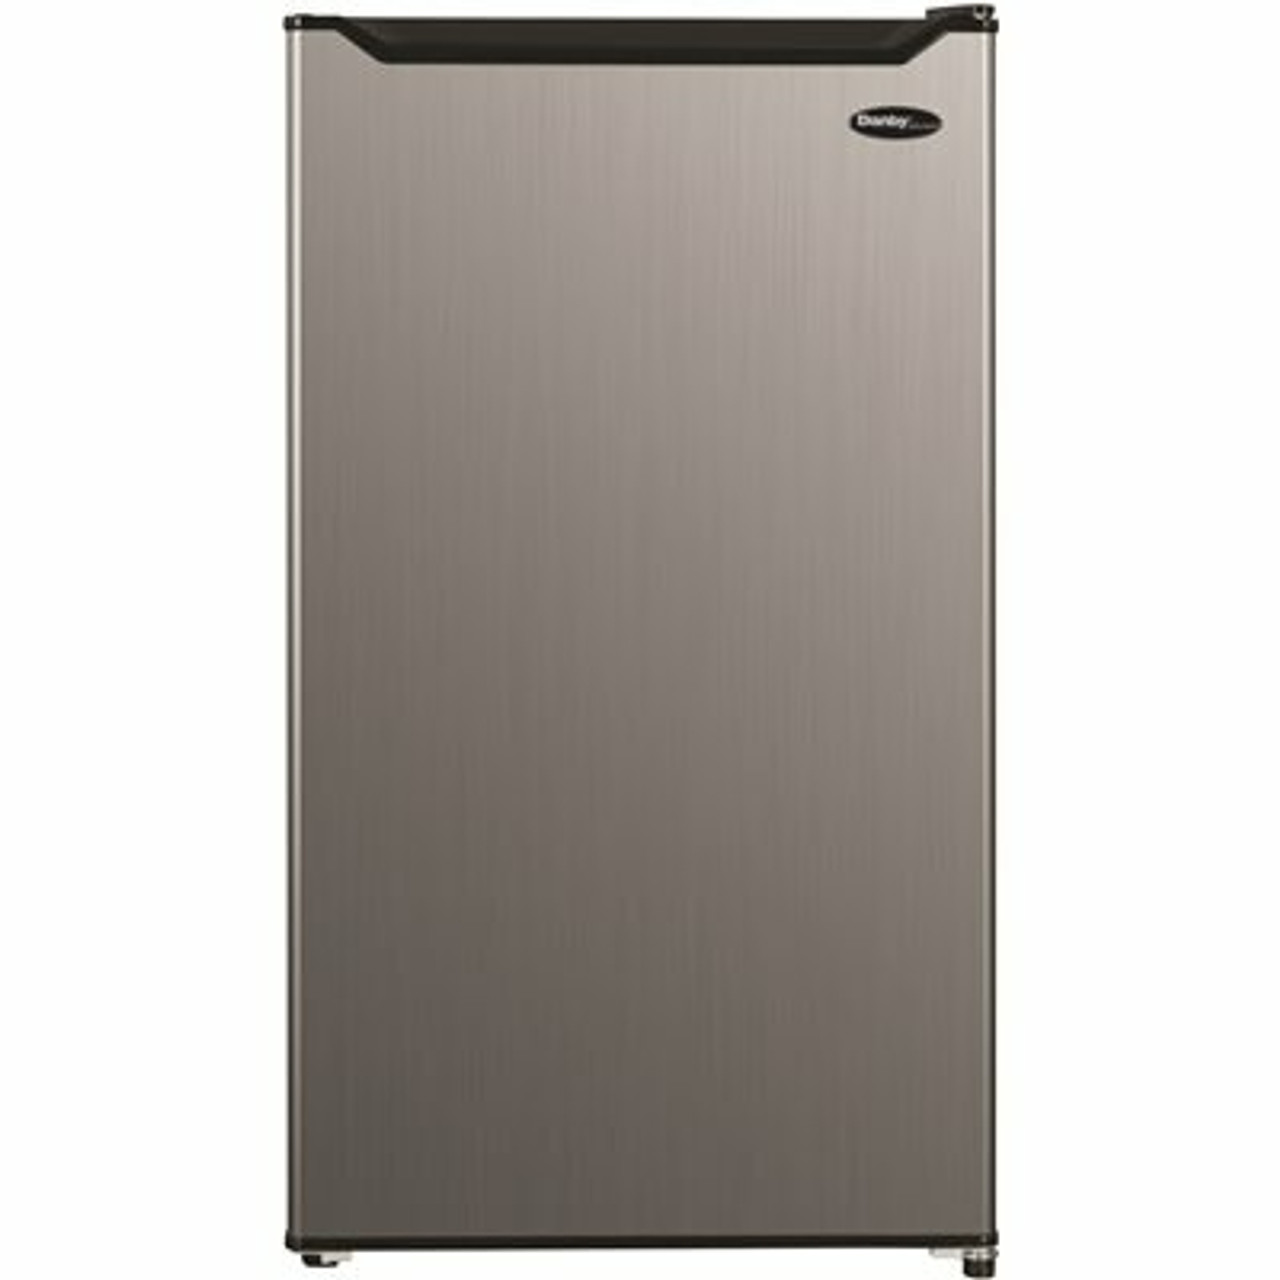 Danby 3.2 Cu. Ft. Mini Refrigerator In Stainless Steel Without Freezer